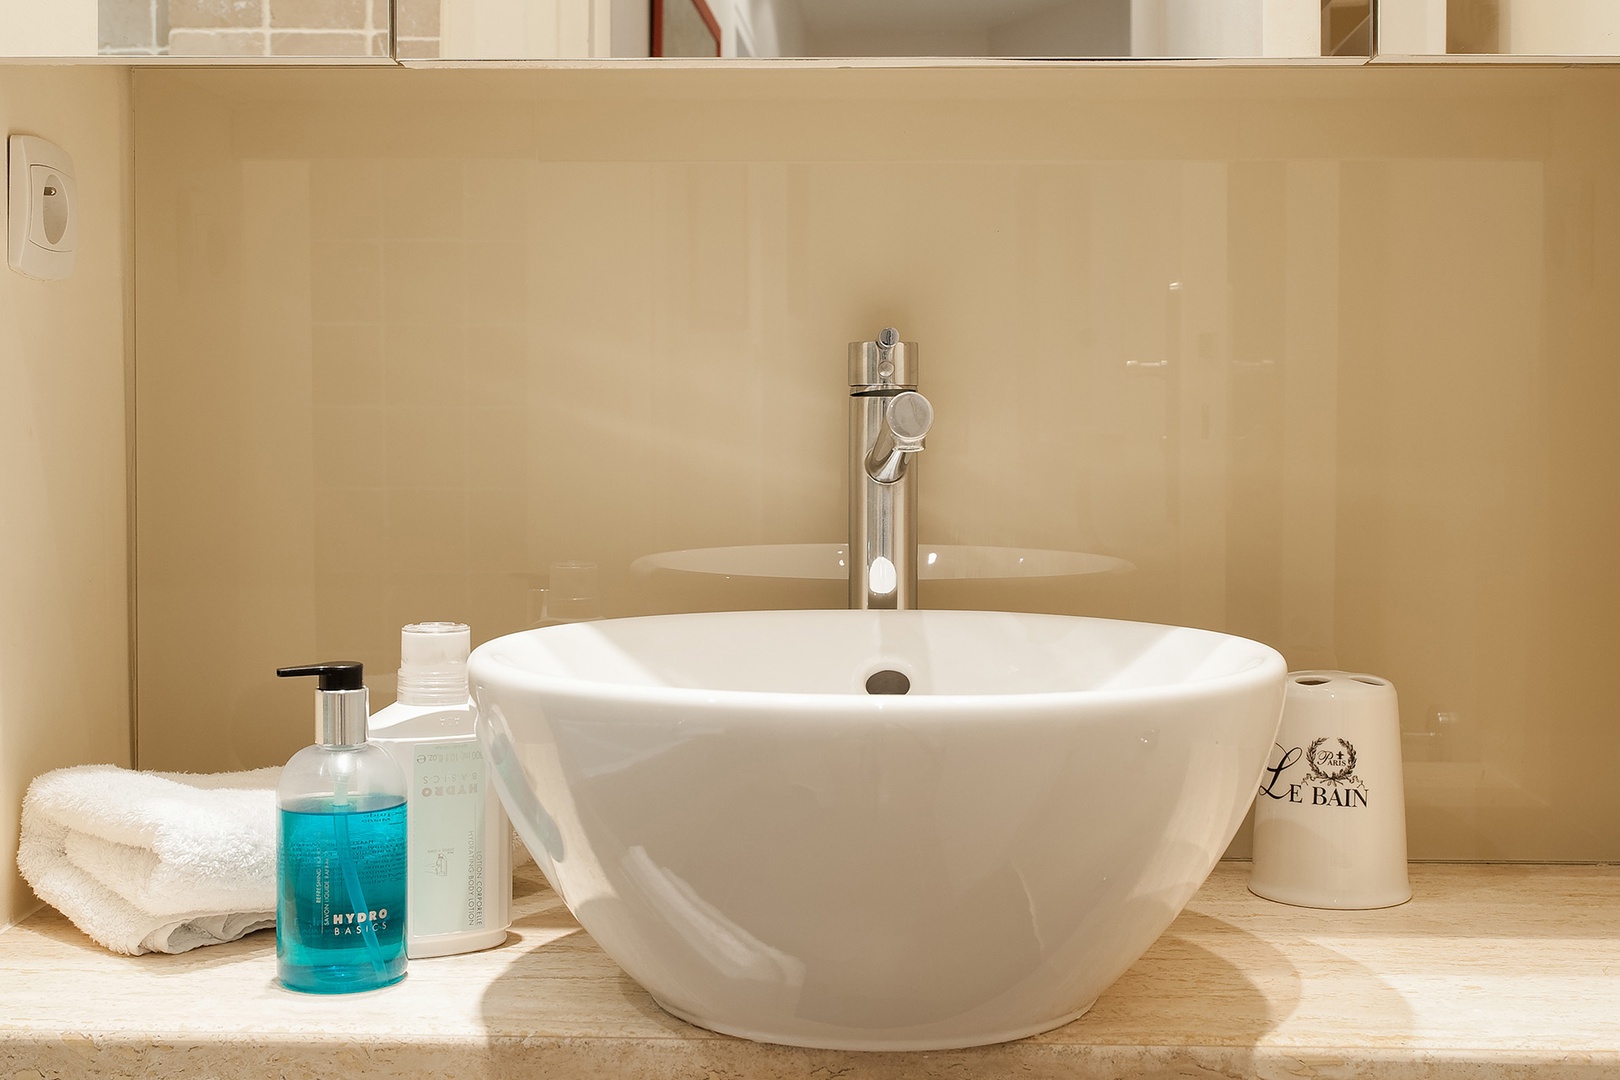 Stylish finishes are found throughout the bathroom.